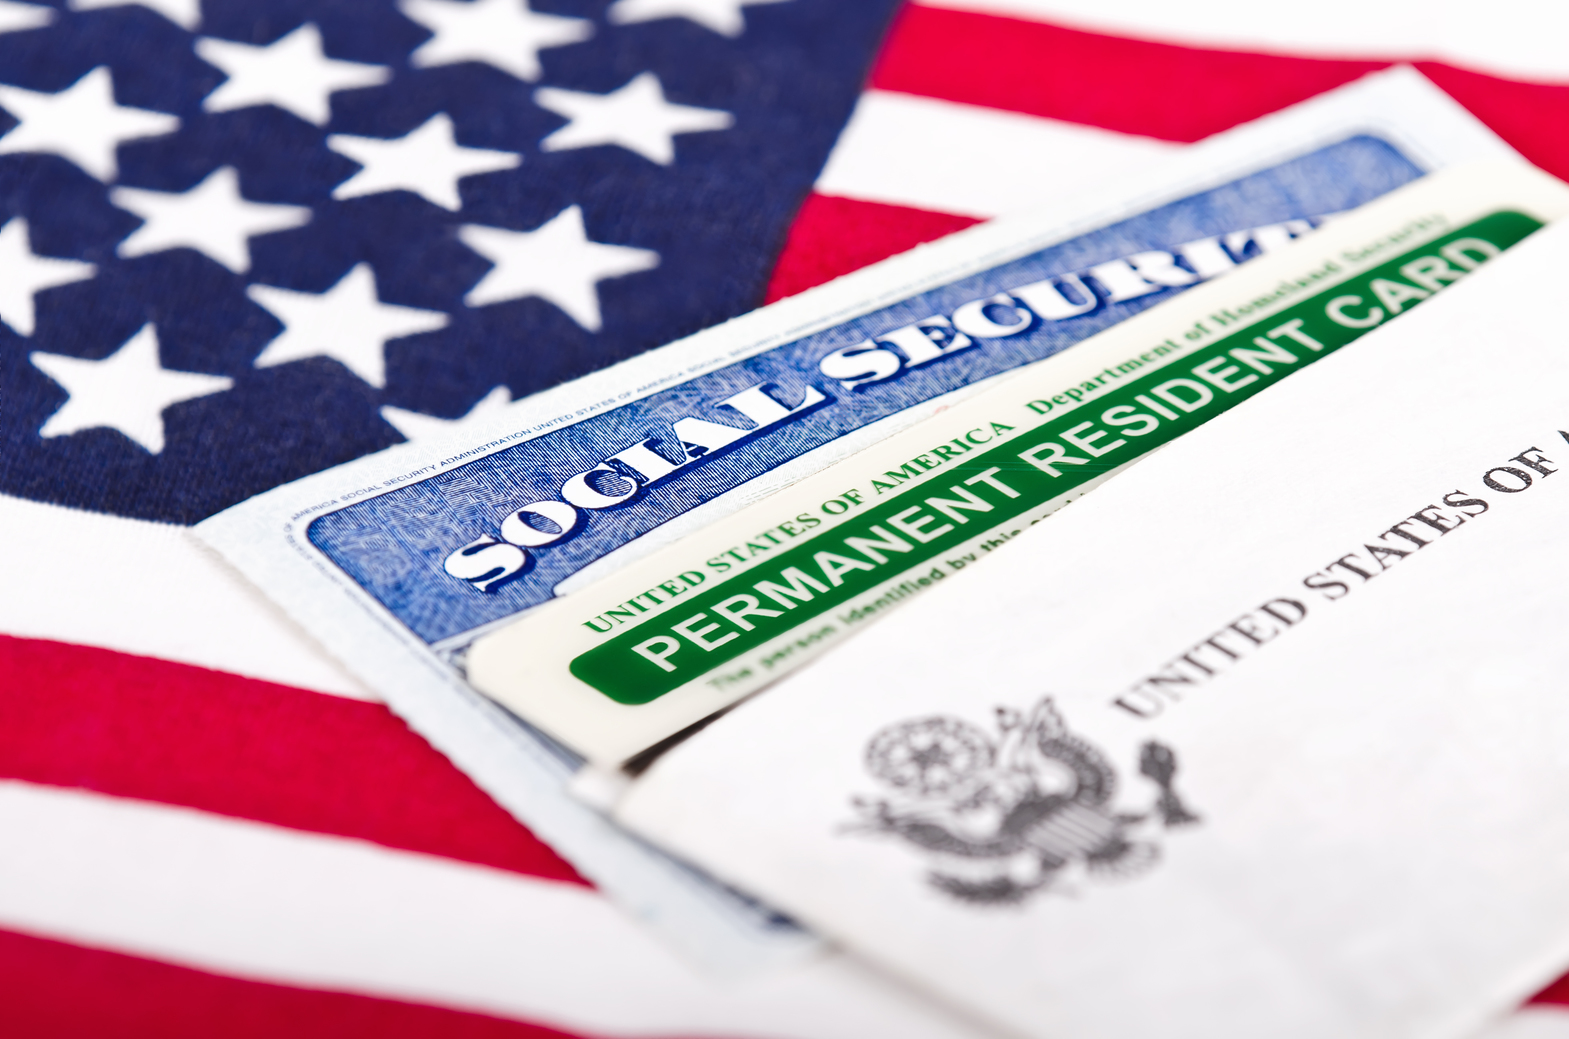 USA Green Card, Flag And Social Security Number